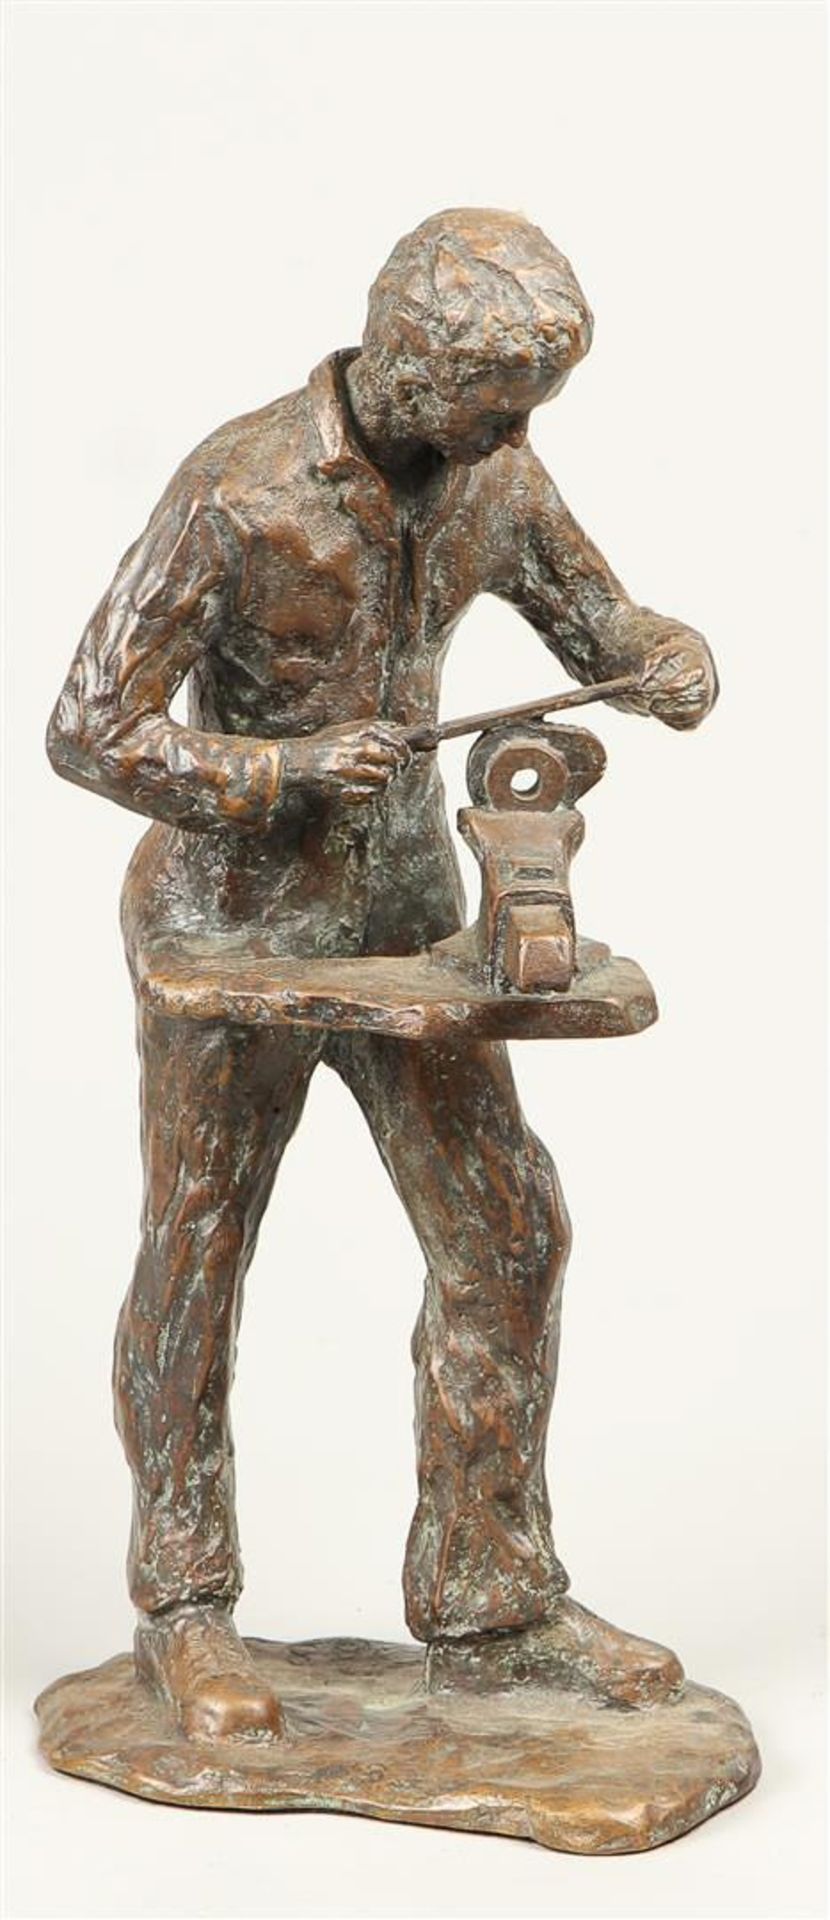 A bronze statue of a metal worker. 2nd half of the 20th century.